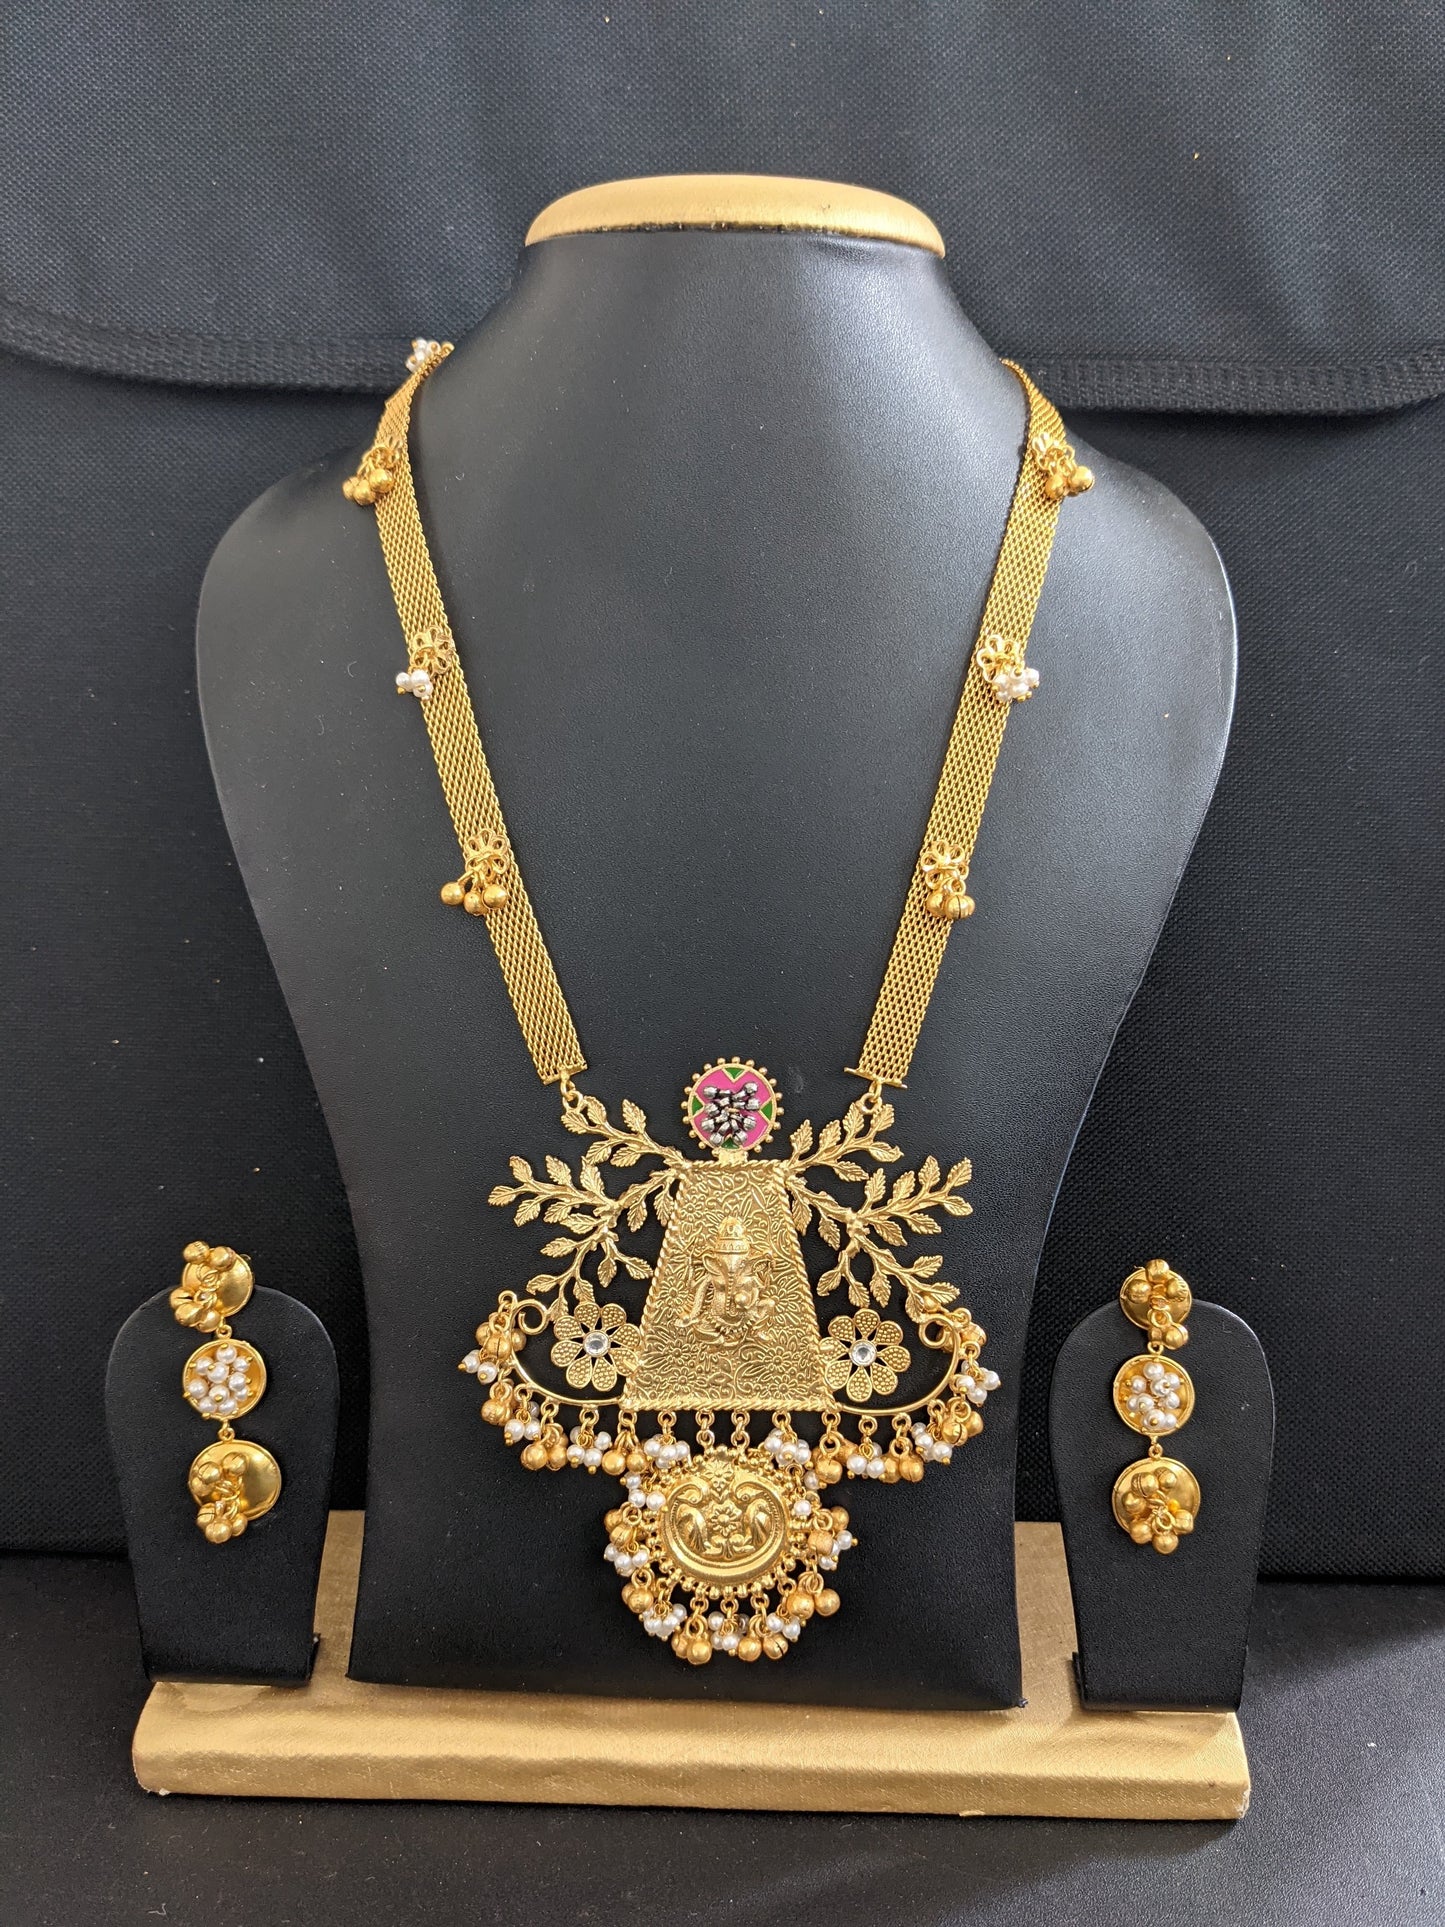 Contemporary Ganesh ji Pendant Necklace and Earrings set